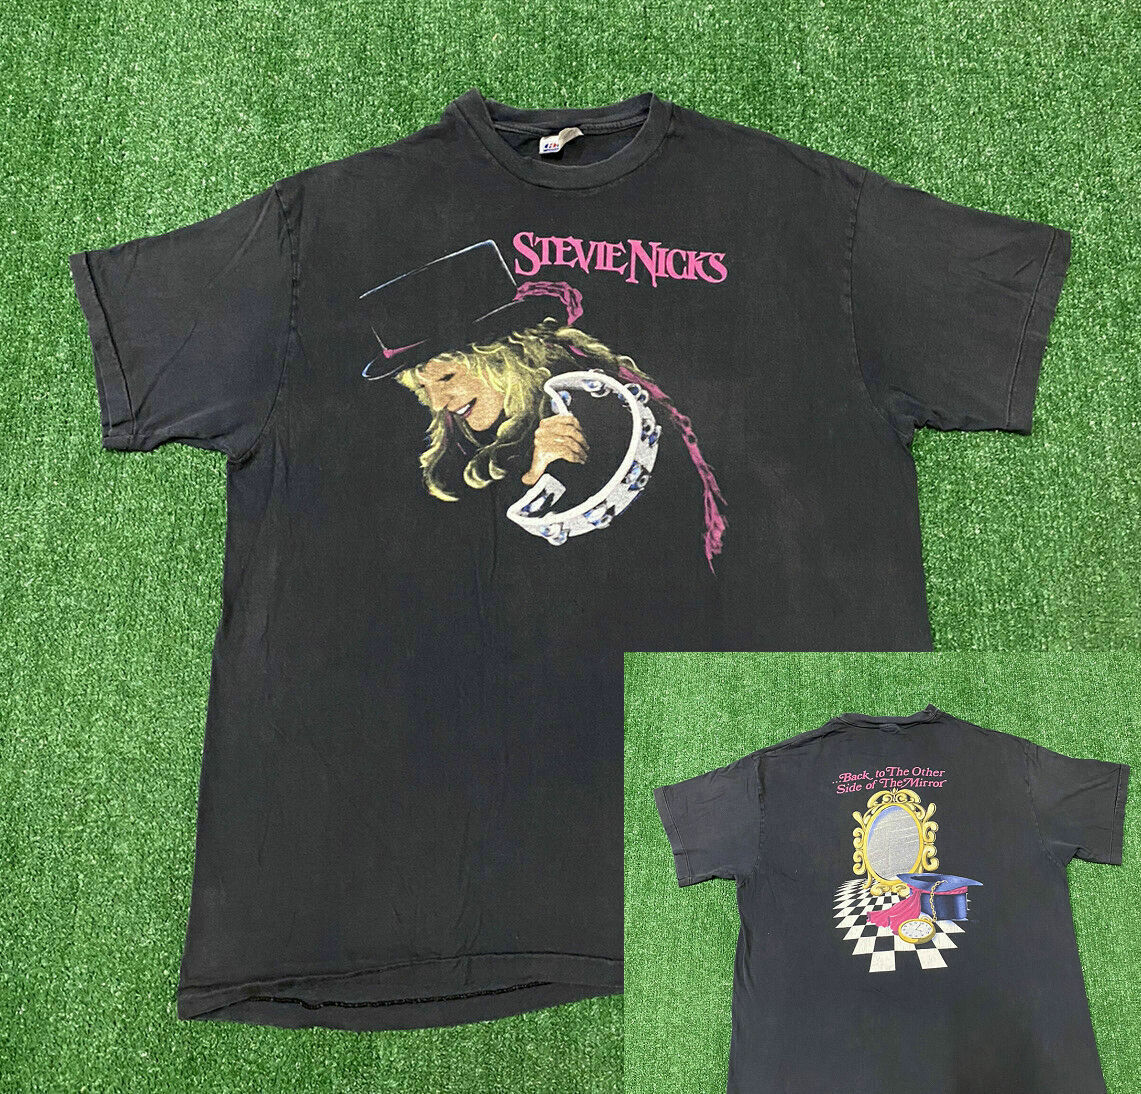 VINTAGE 1989 STEVIE NICKS OTHER SIDE OF THE MIRROR TOUR BAND T-SHIRT REPRINT 1